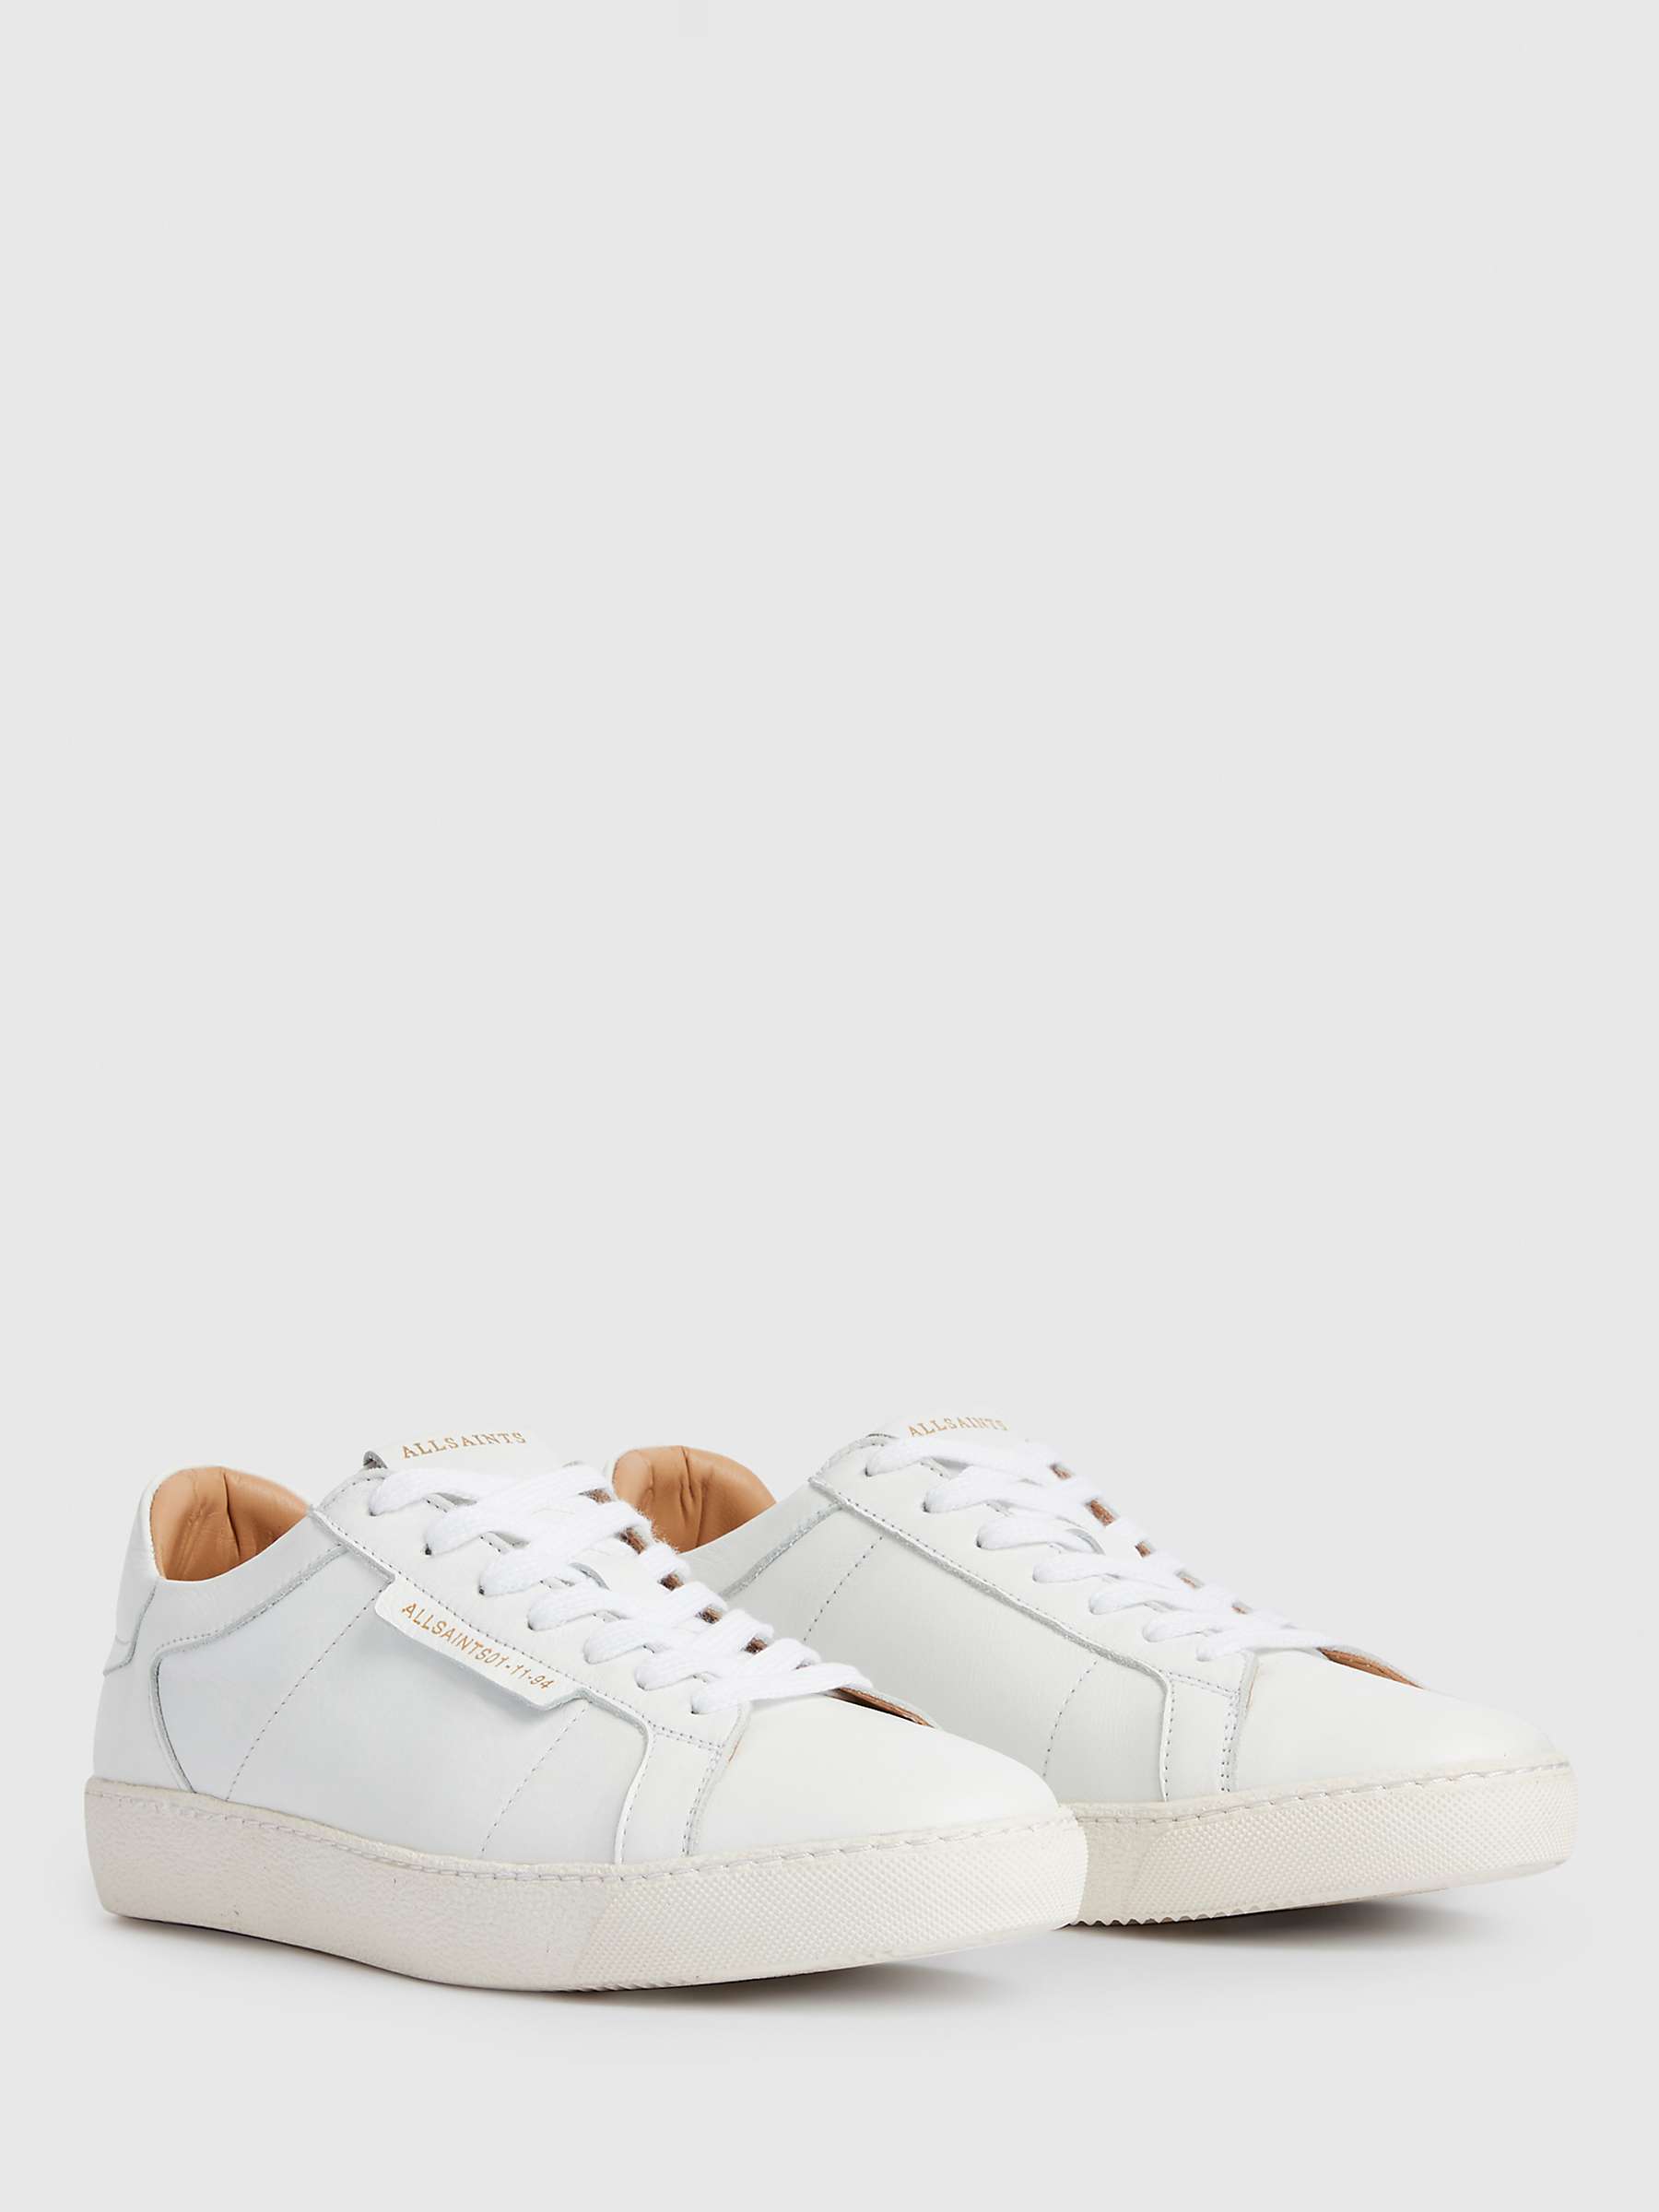 Buy AllSaints Sheer Low Top Leather Trainers Online at johnlewis.com